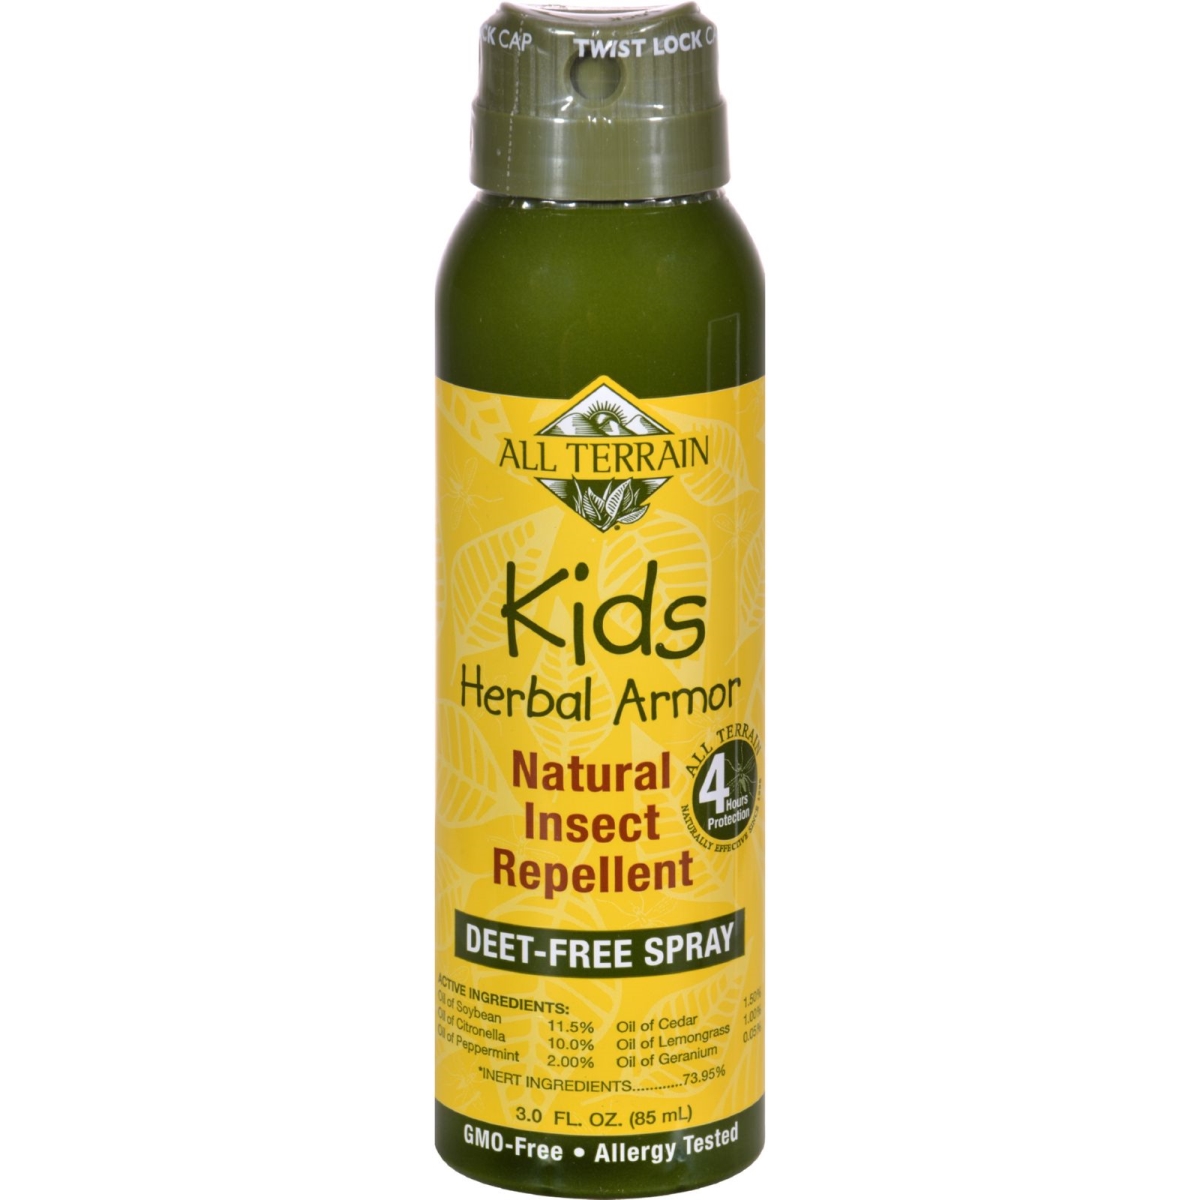 1525260 3 Fl. Oz Herbal Armor Natural Insect Repellent Kids Continuous Spray